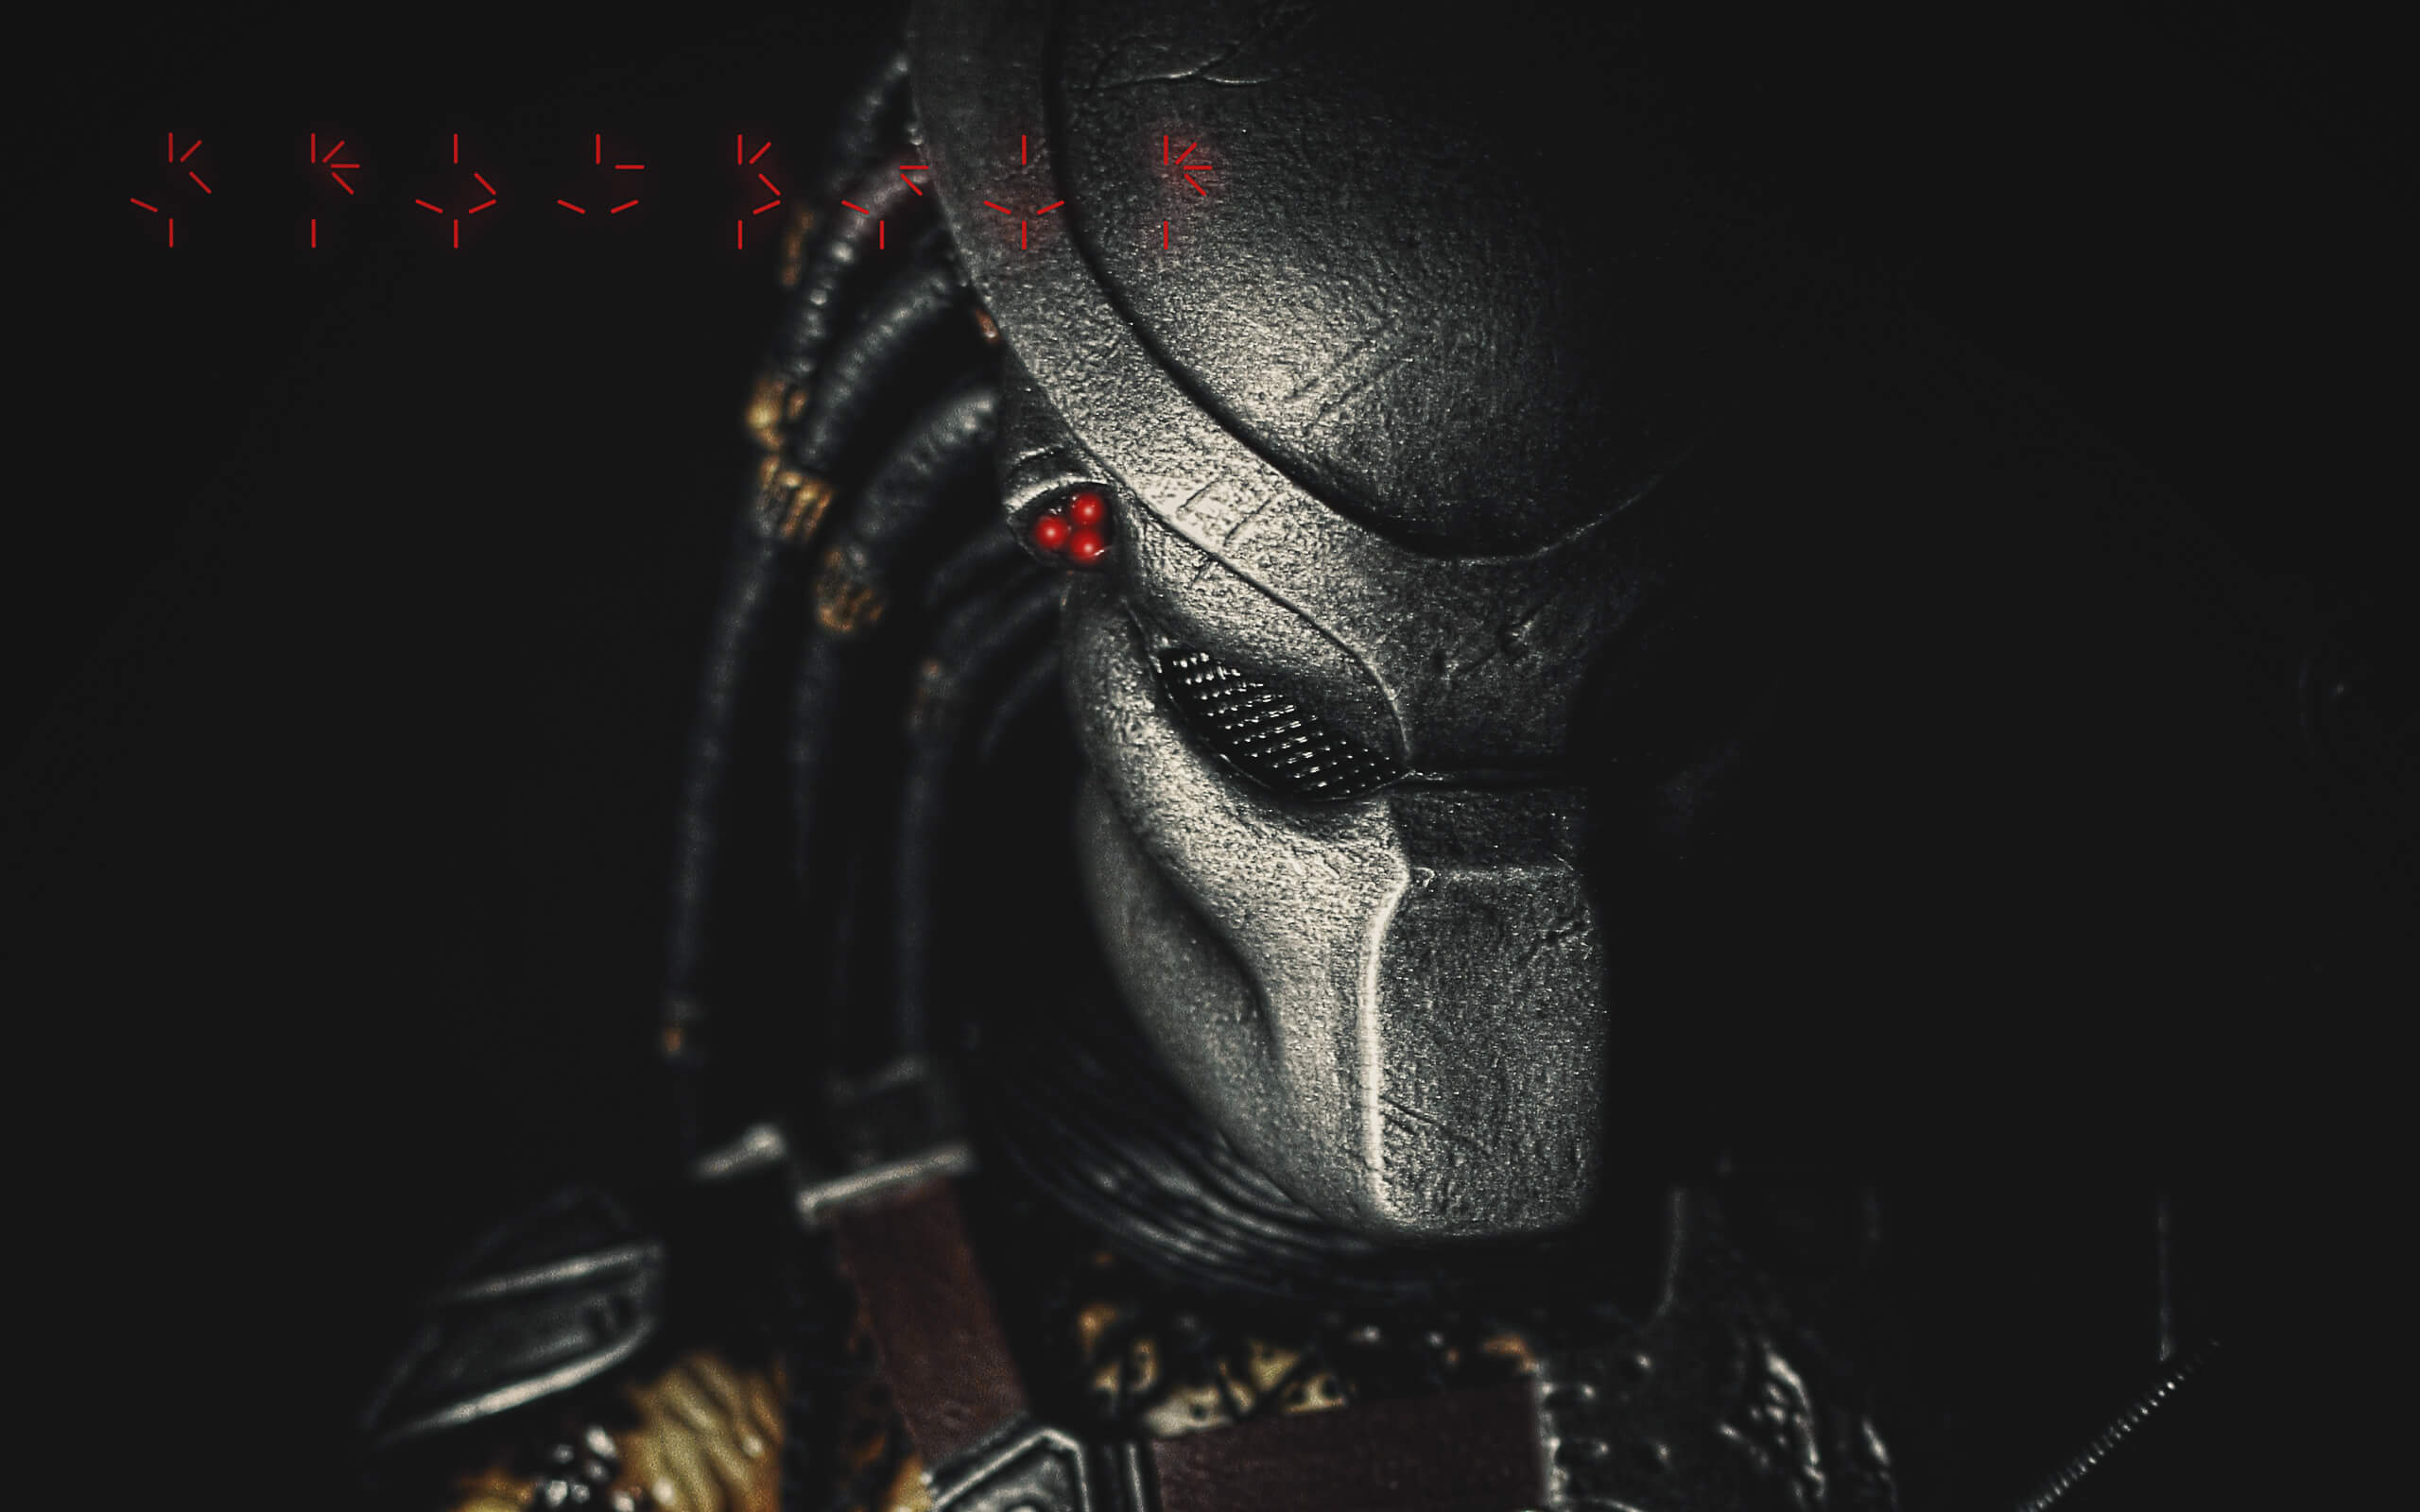 The Next ‘Predator’ Film Gets An Official Title, New Details Revealed